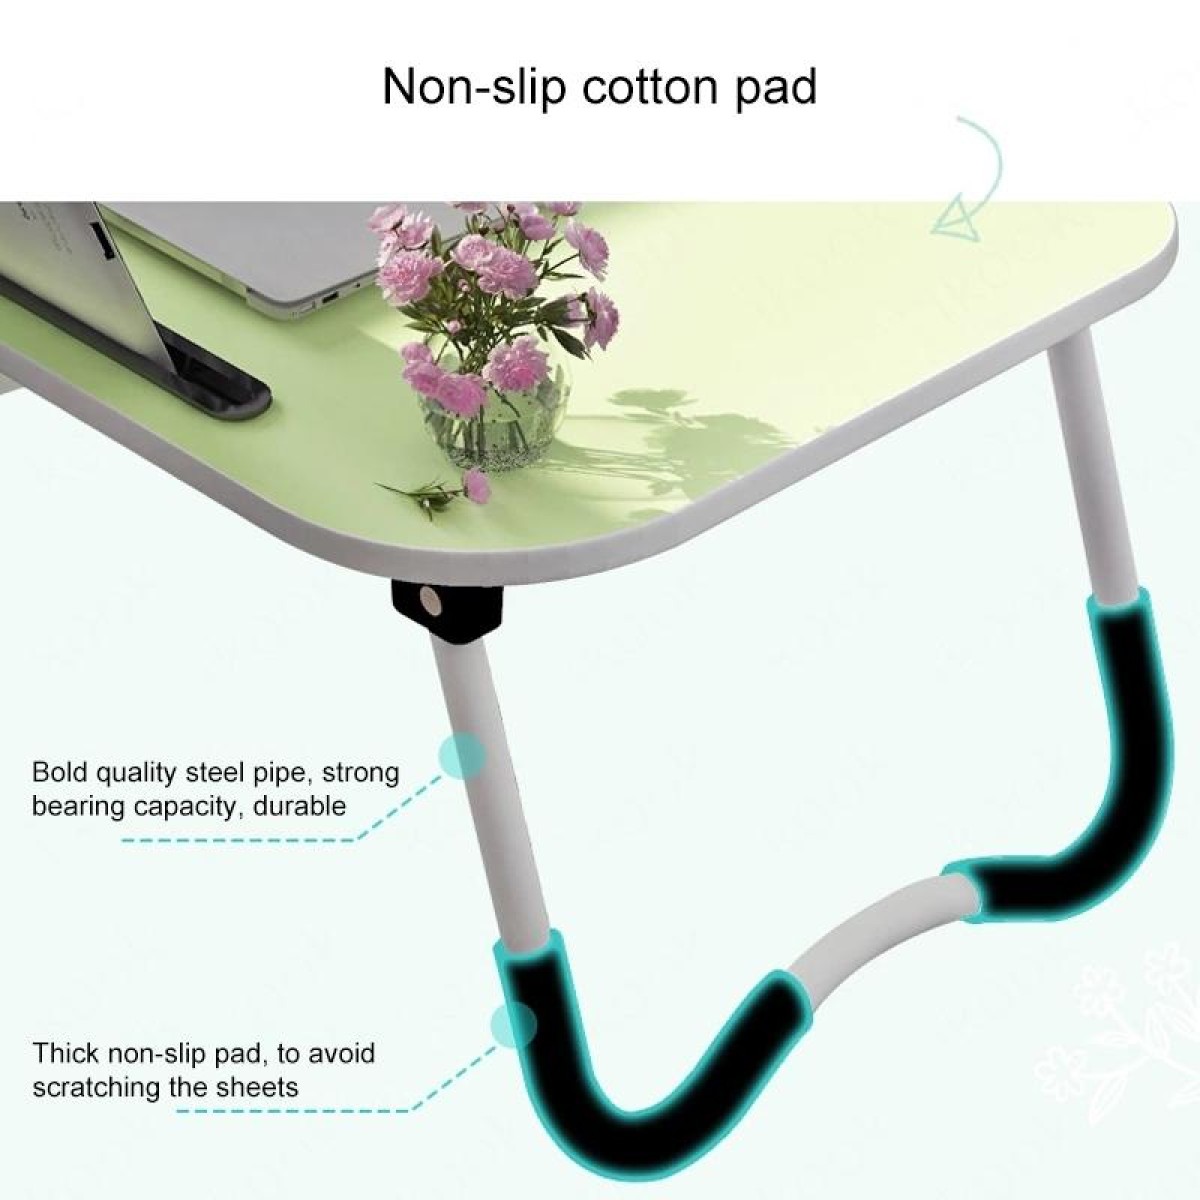 Foldable Non-slip Laptop Desk Table Stand with Card Slot & Cup Slot (Green)